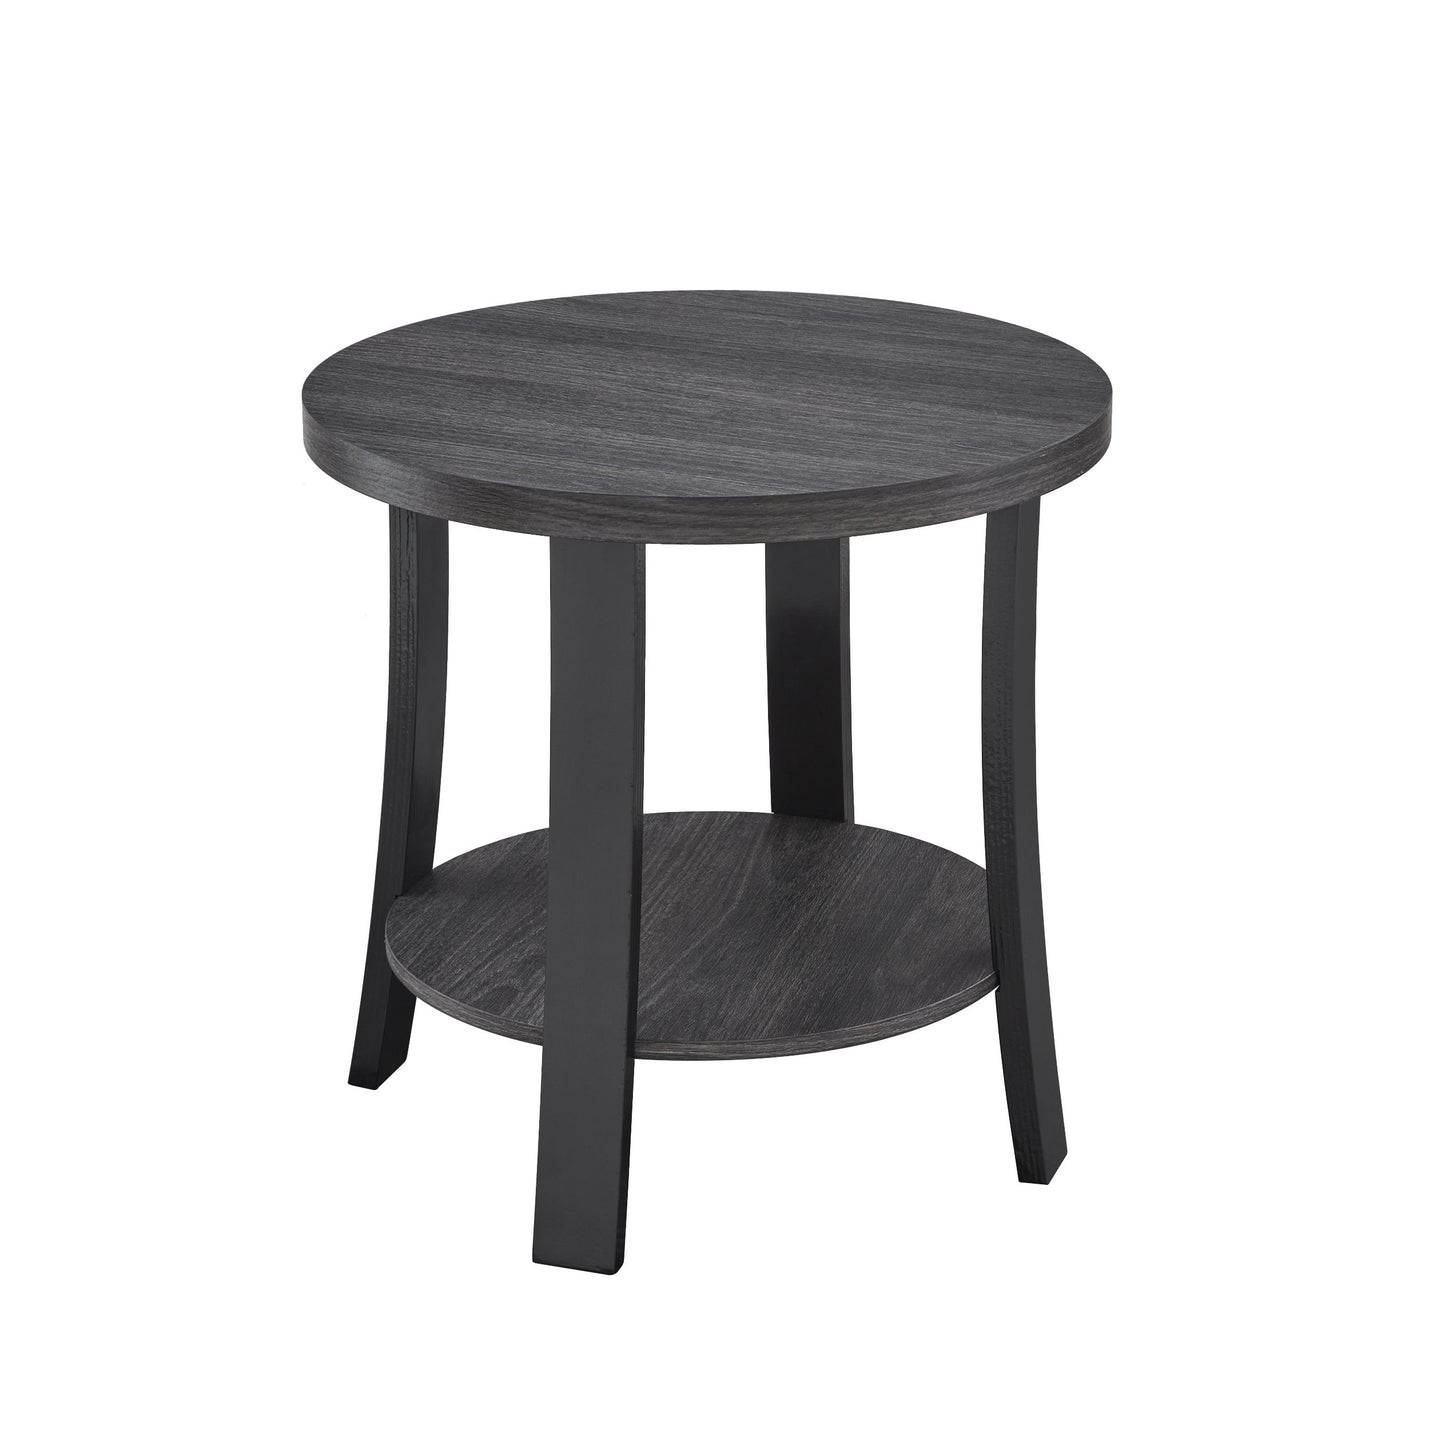 Anze Contemporary Round Wood Shelf End Table